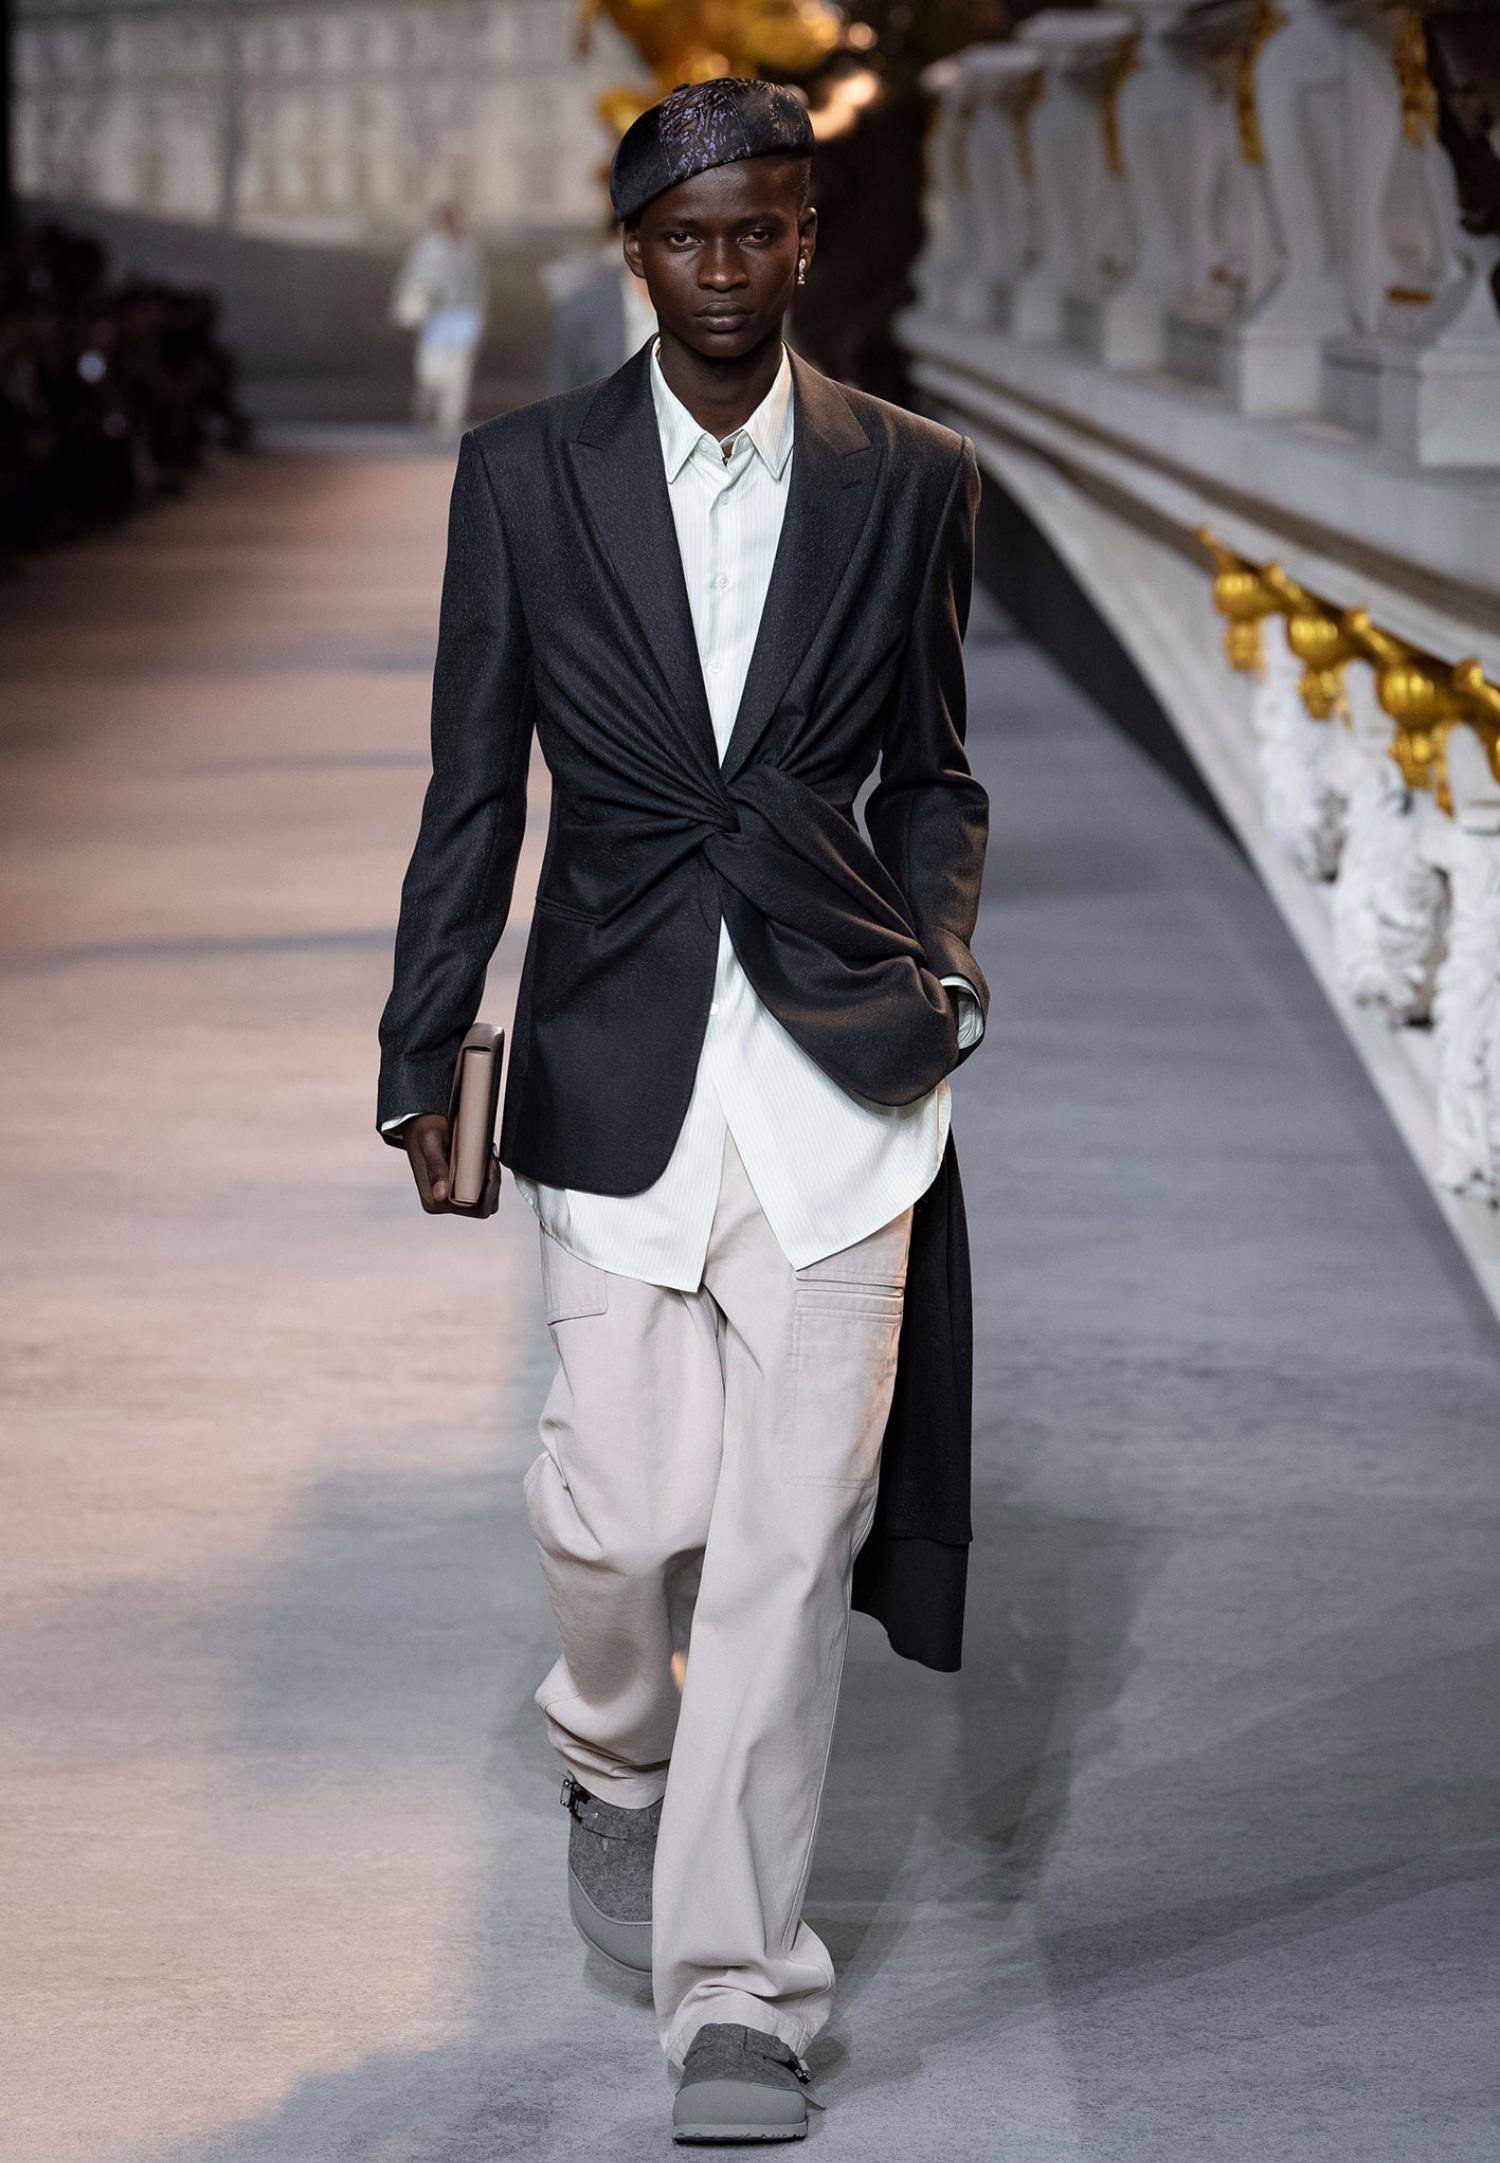 Hat by Stephen Jones for the Dior men's Fall-Winter 2022 show